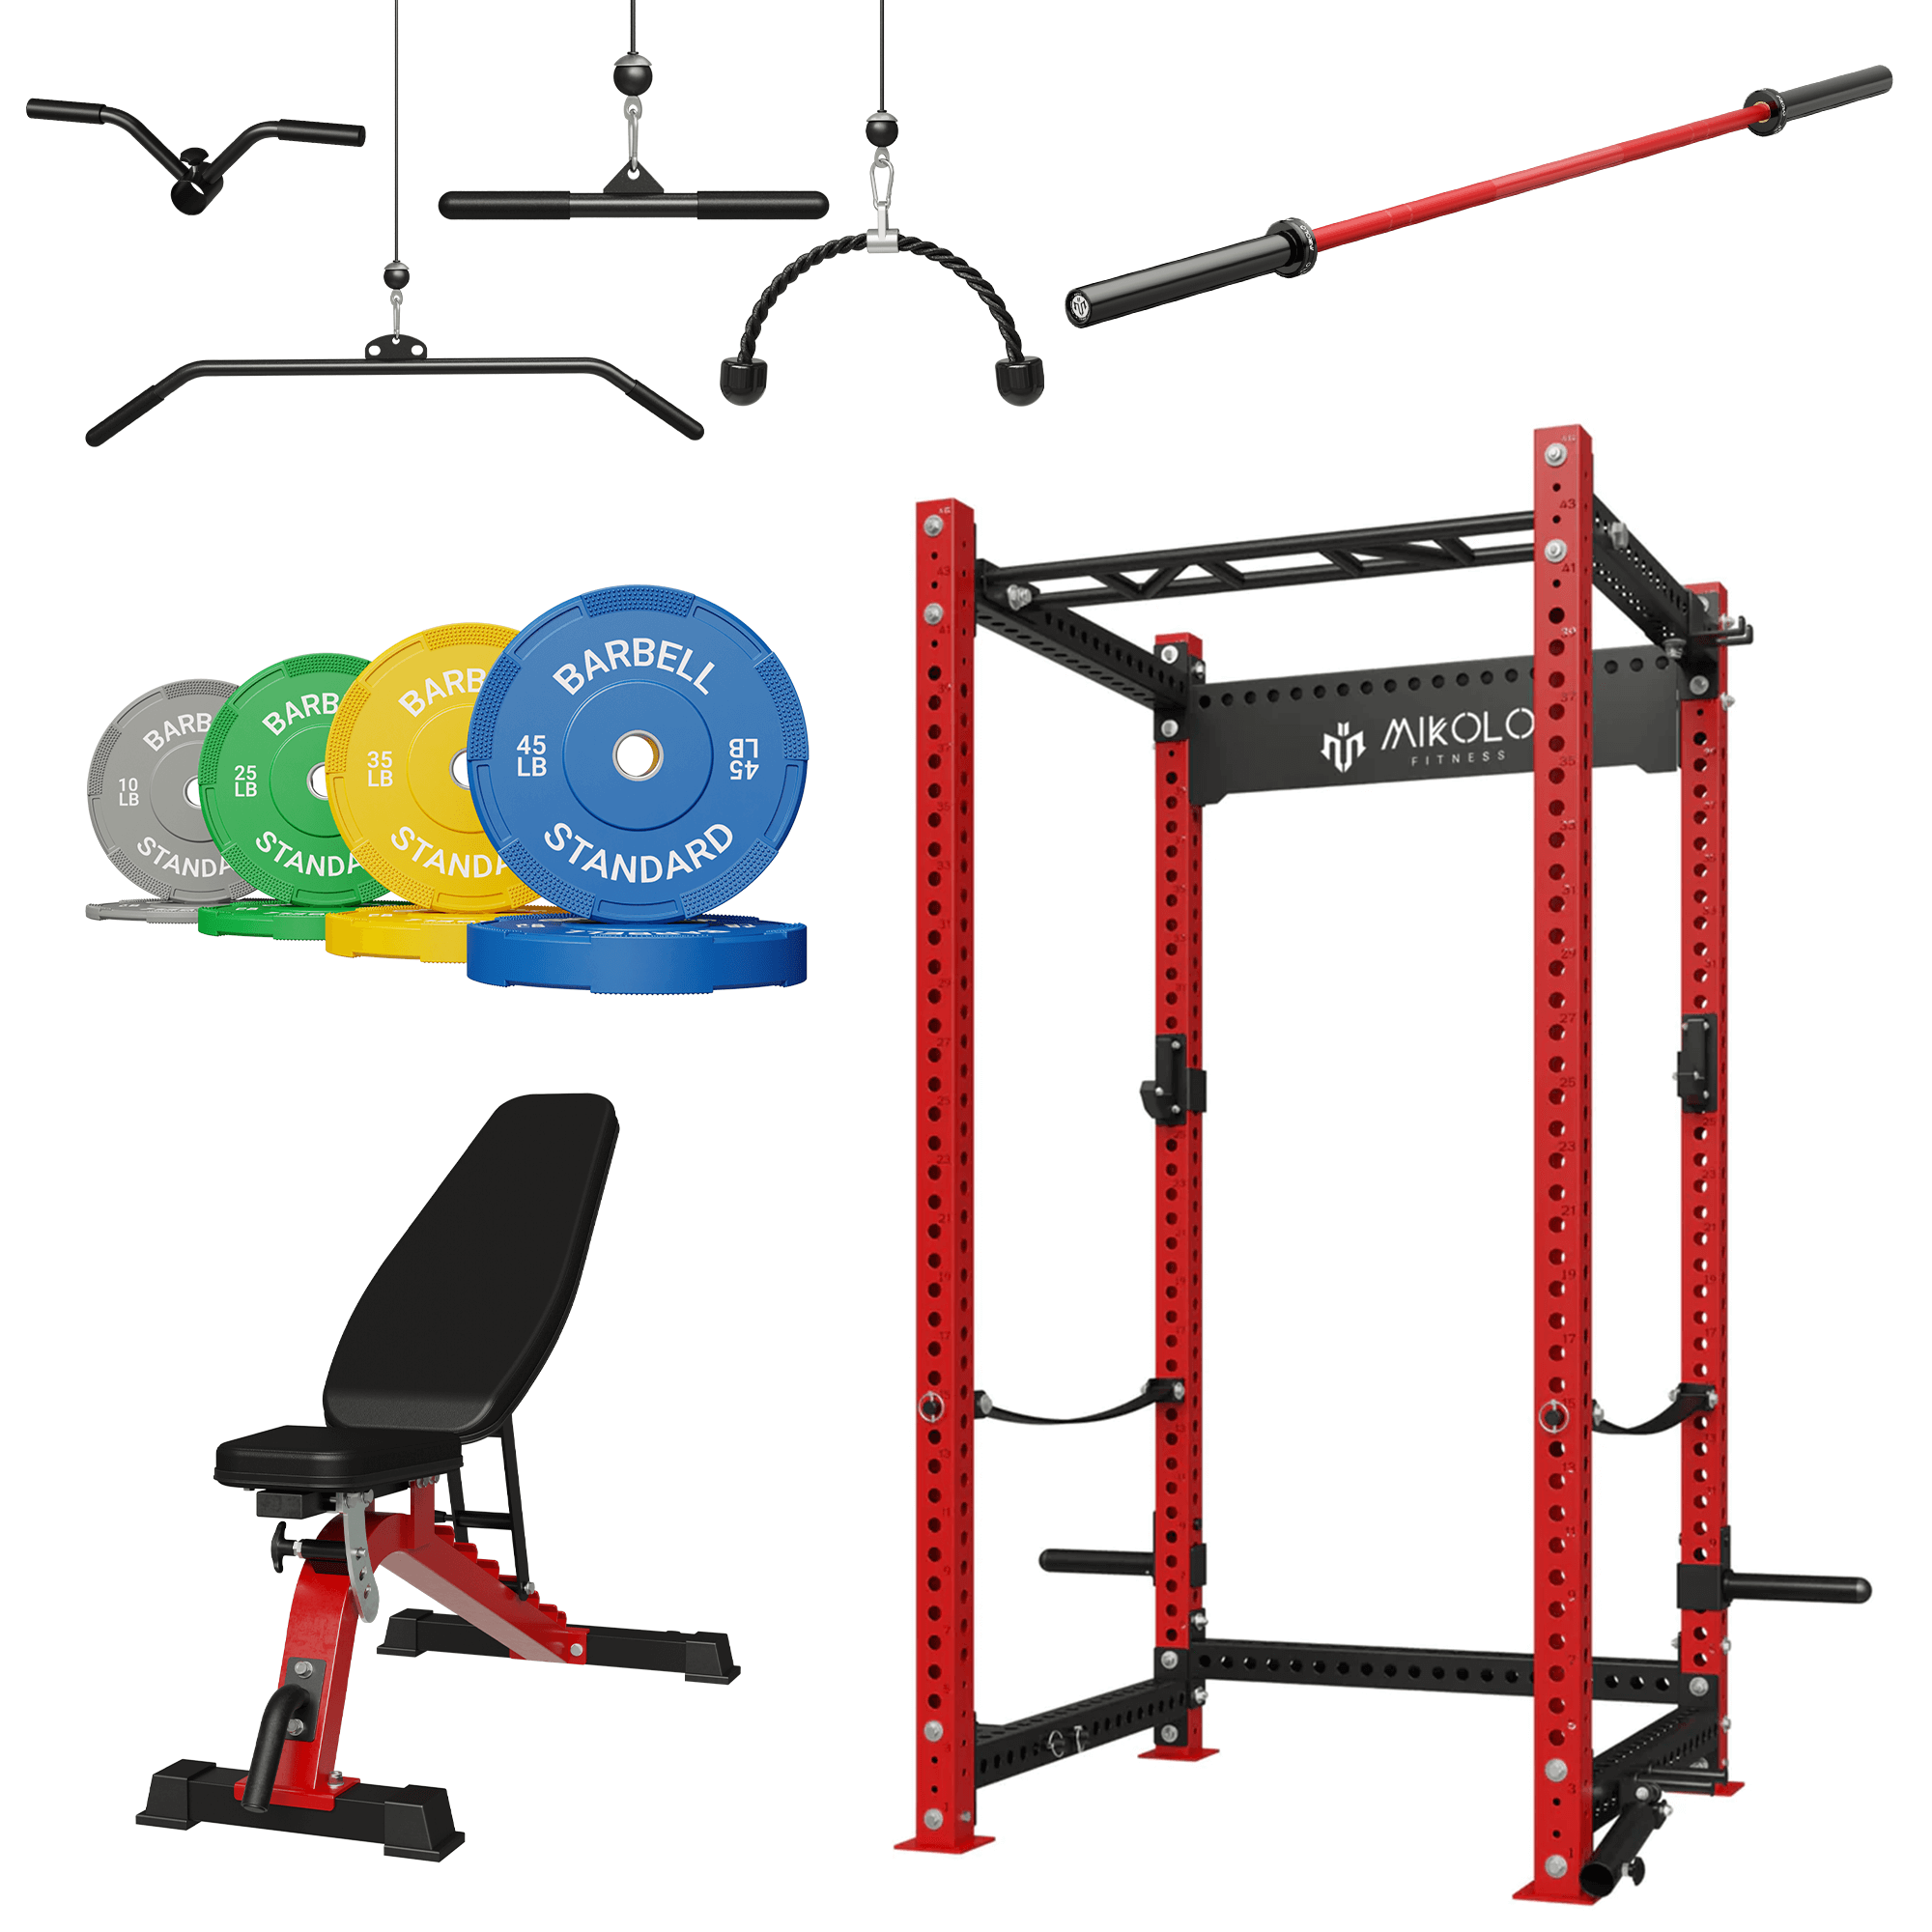 MIKOLO P5 Home Gym Package